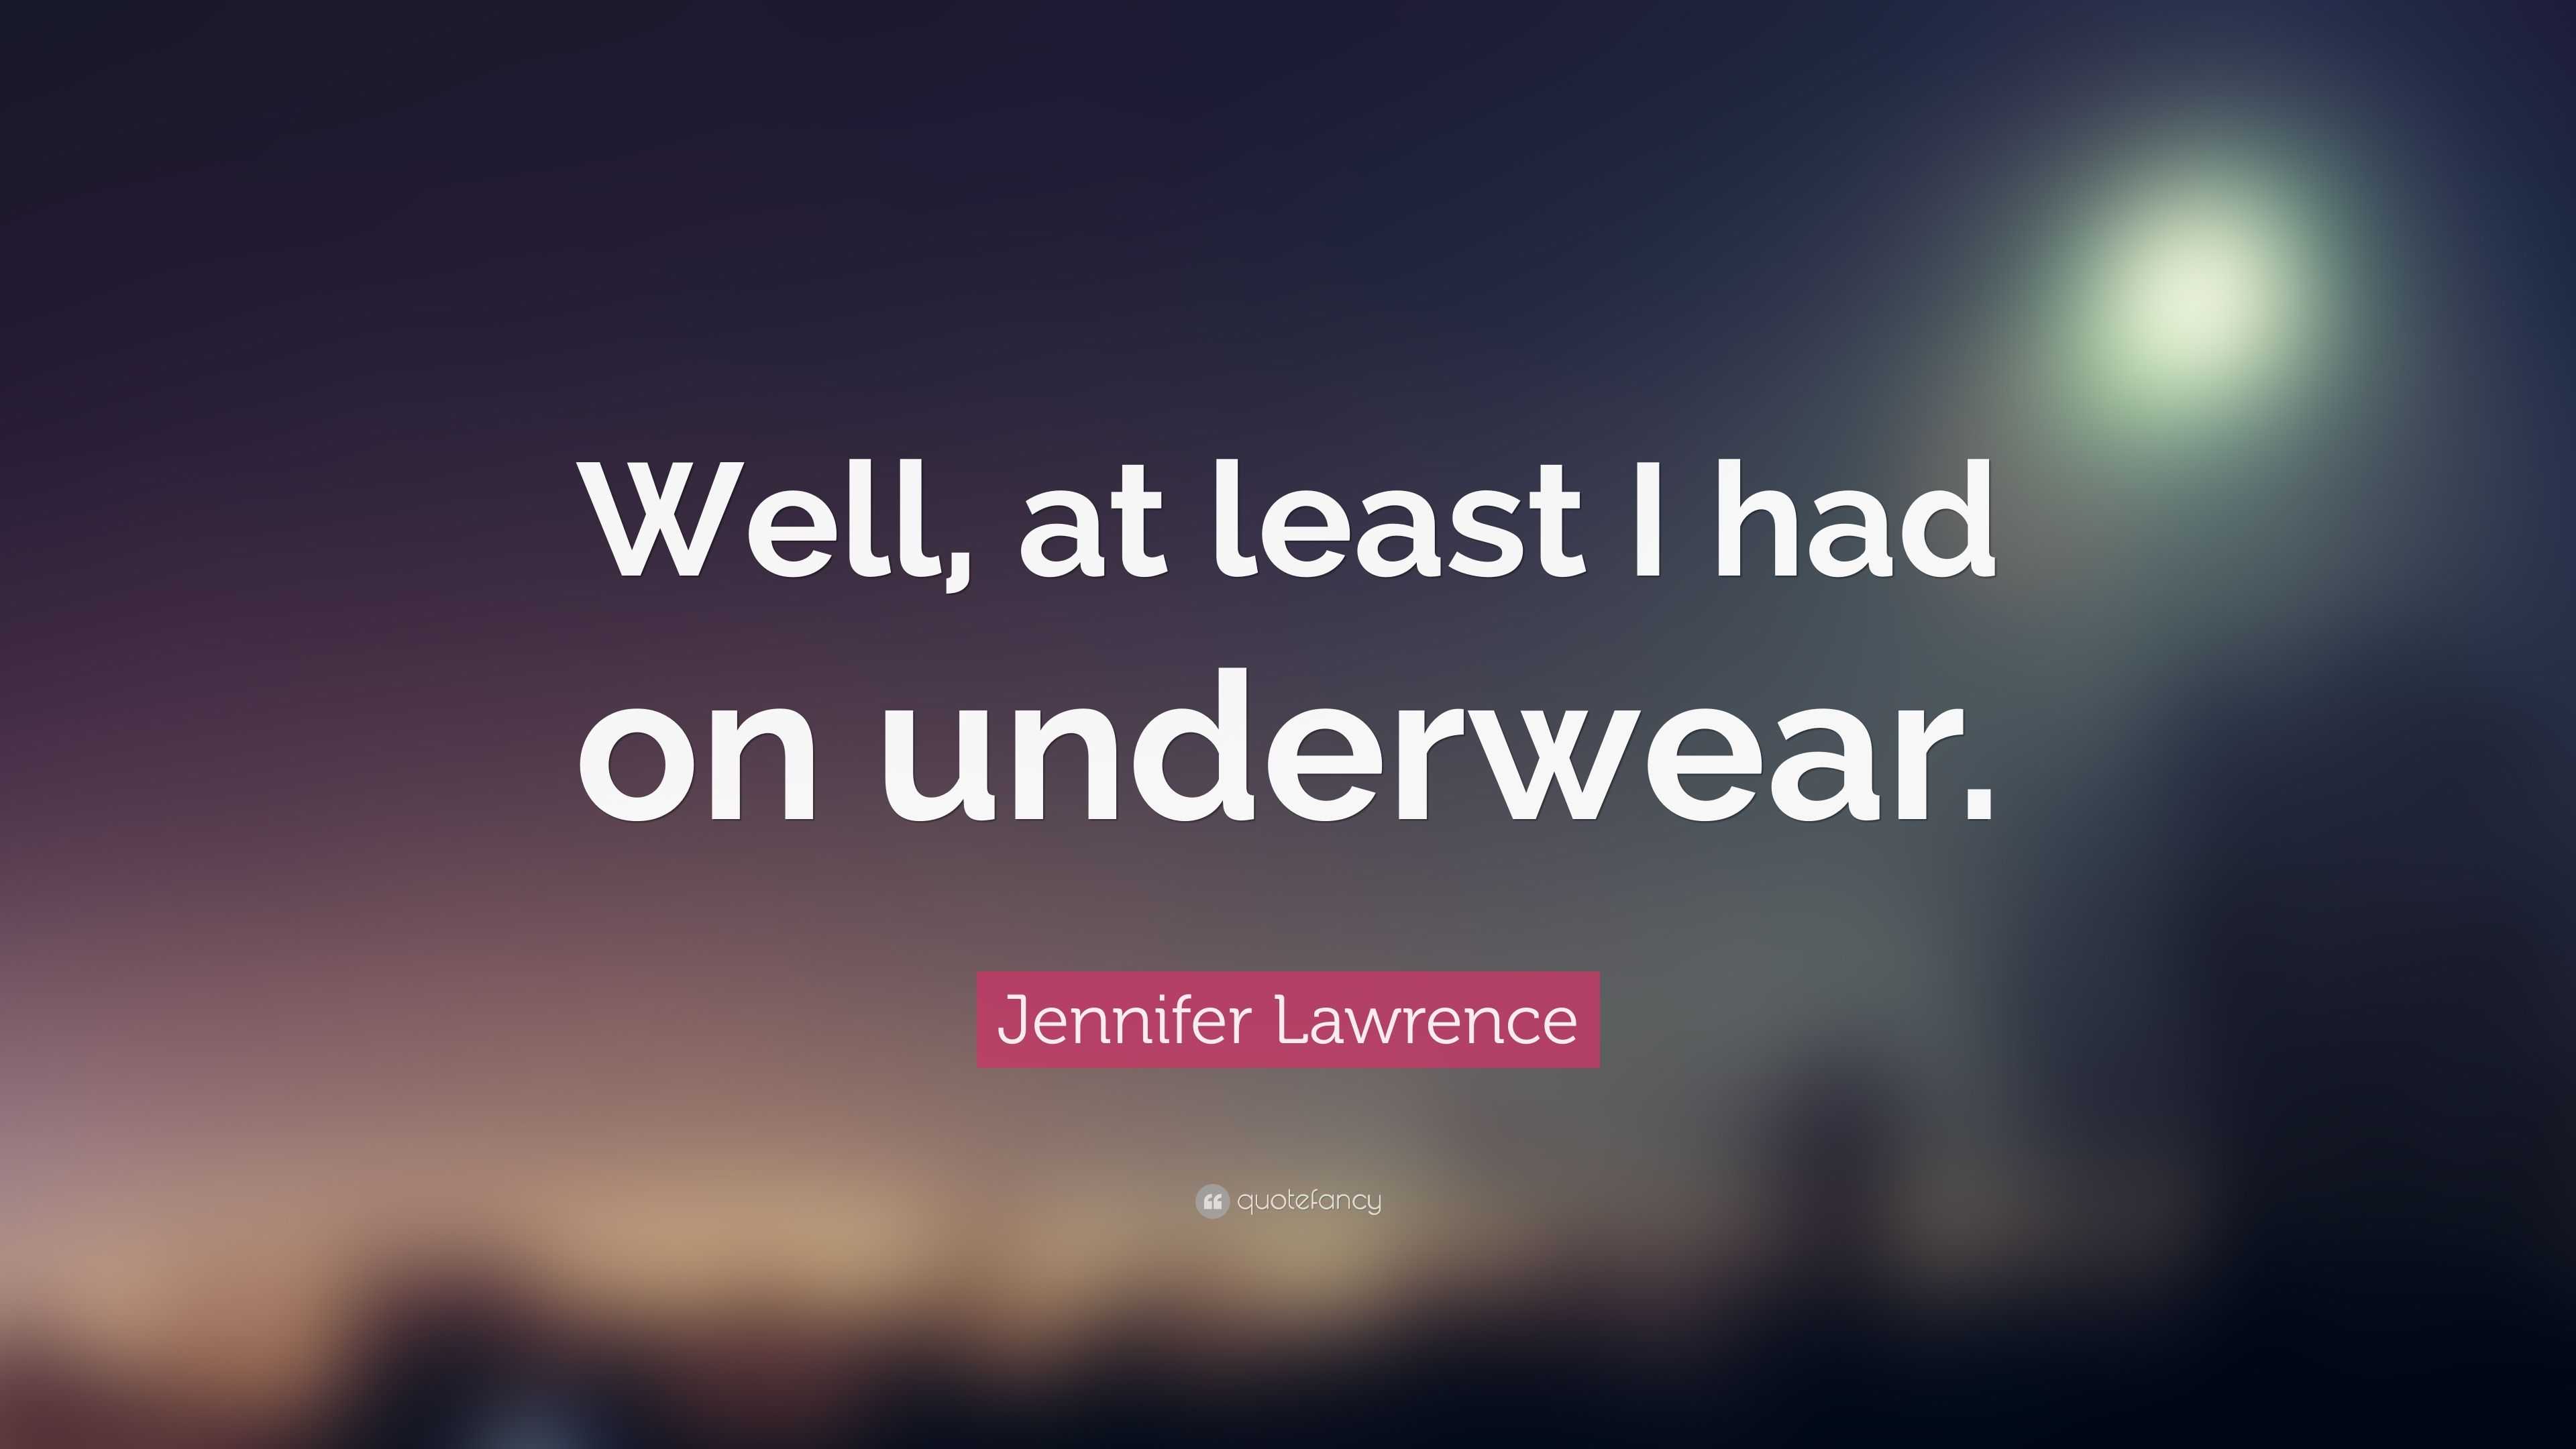 colin foreman recommends jennifer lawrence in underwear pic